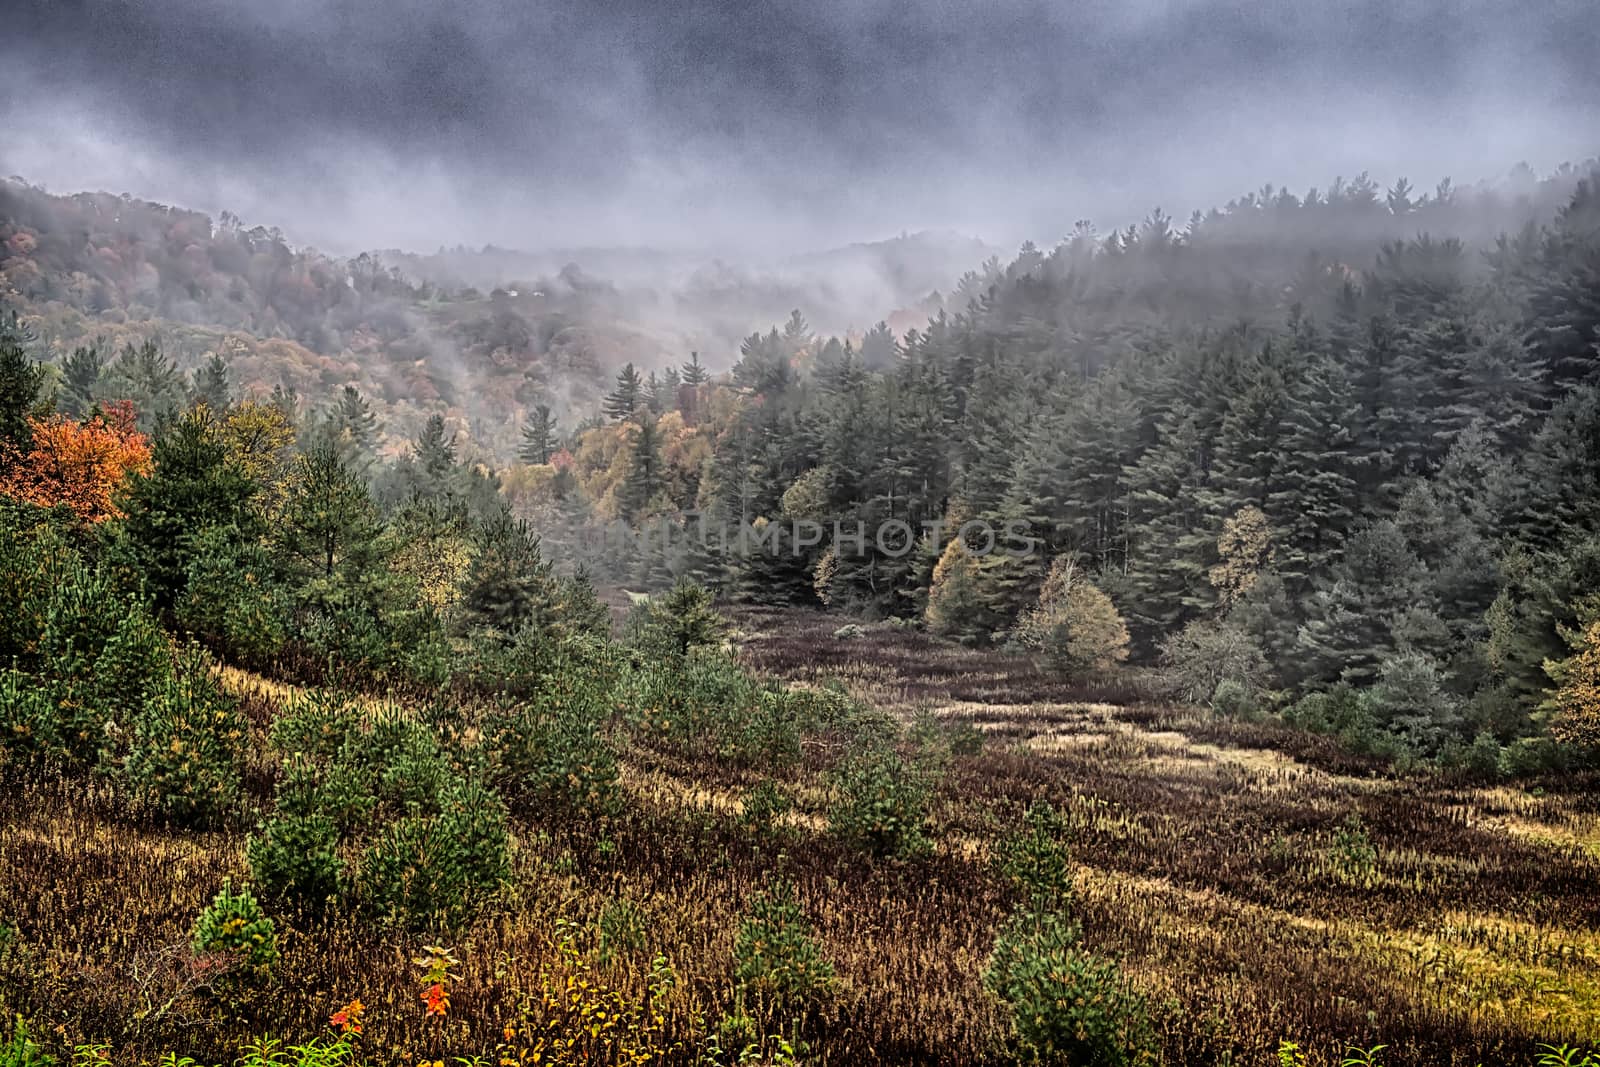 autumng season in the smoky mountains by digidreamgrafix